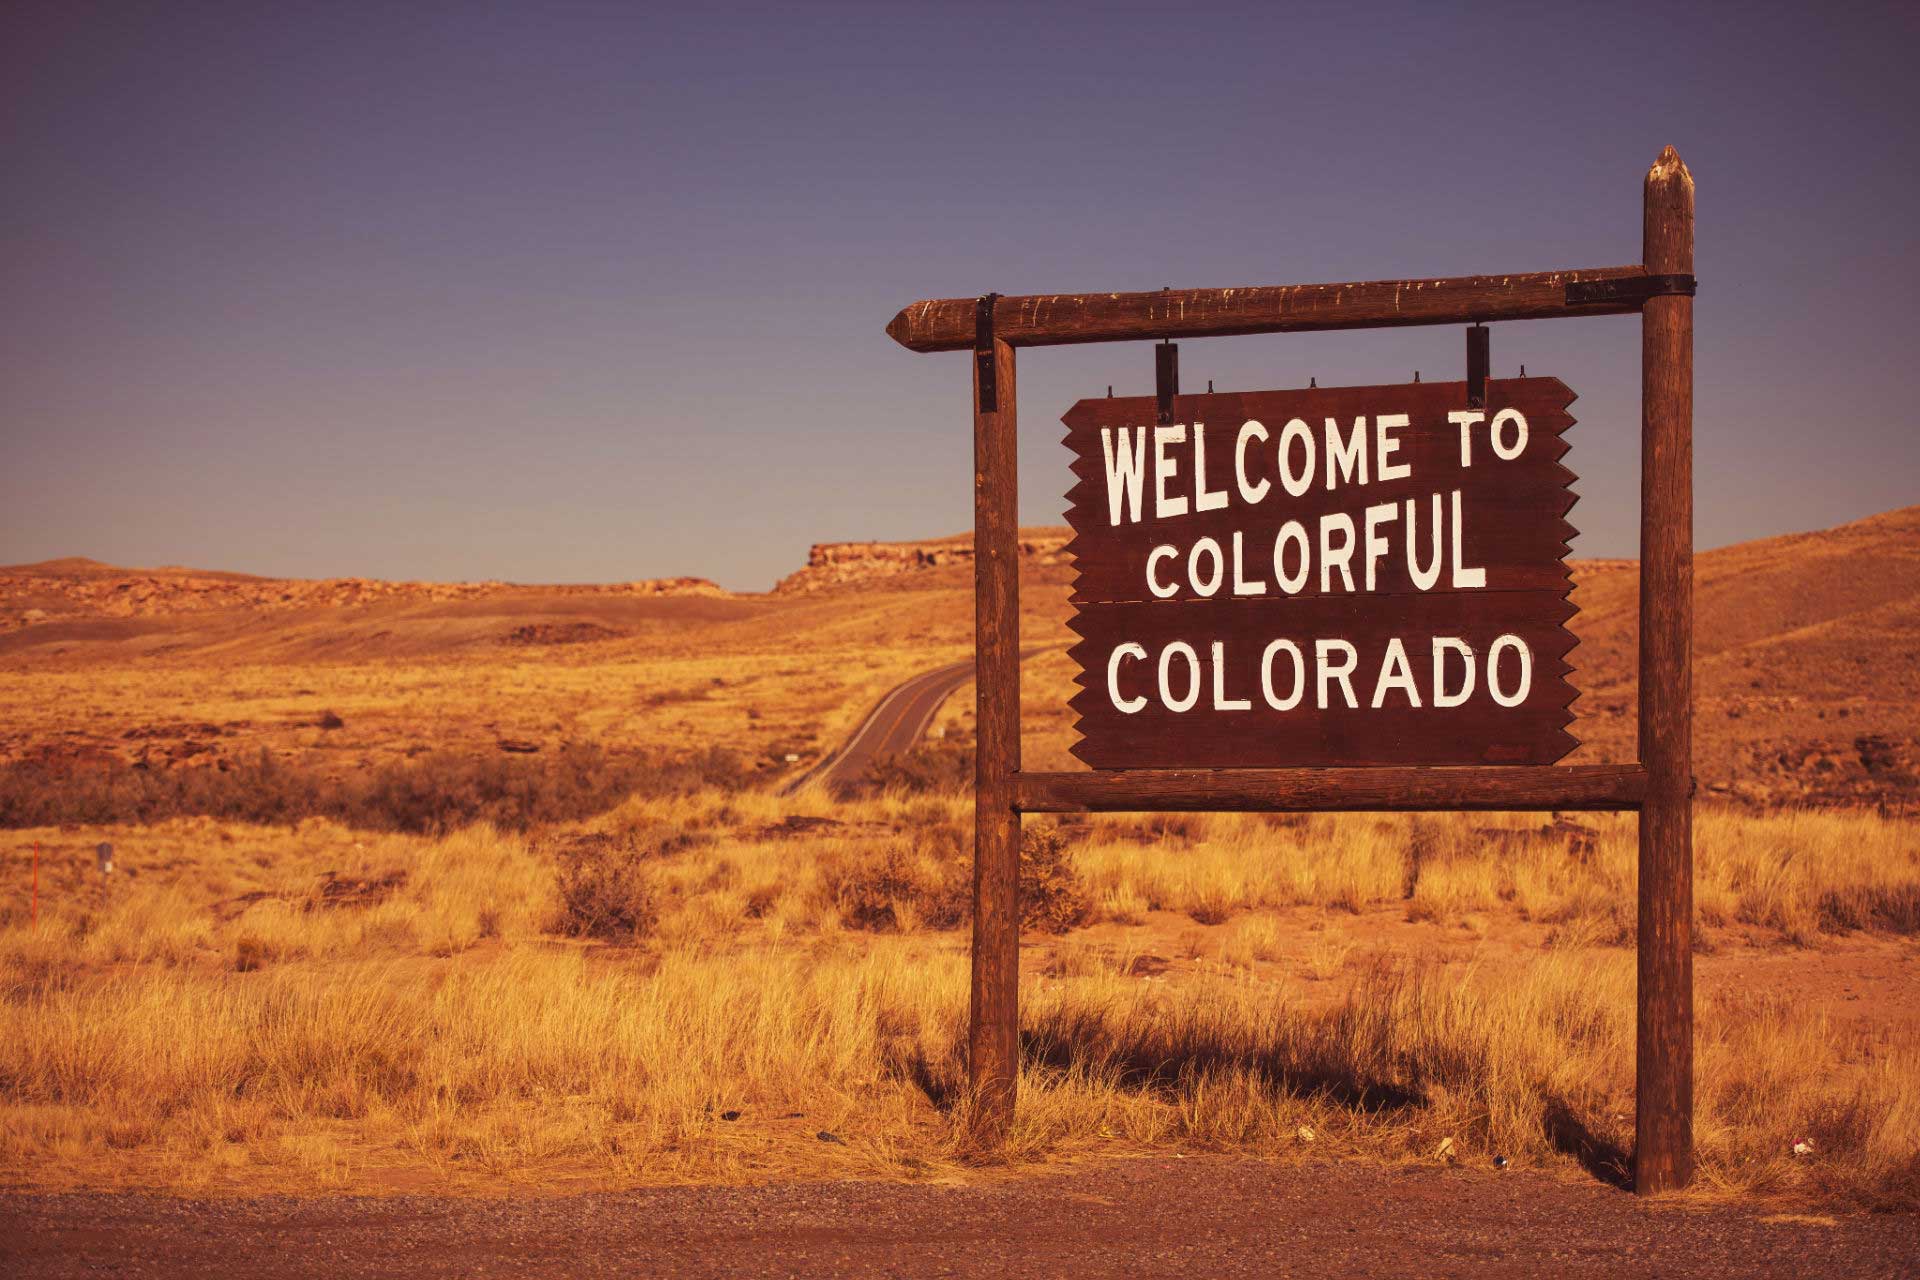 “Welcome to Colorful Colorado” sign at Colorado state line.